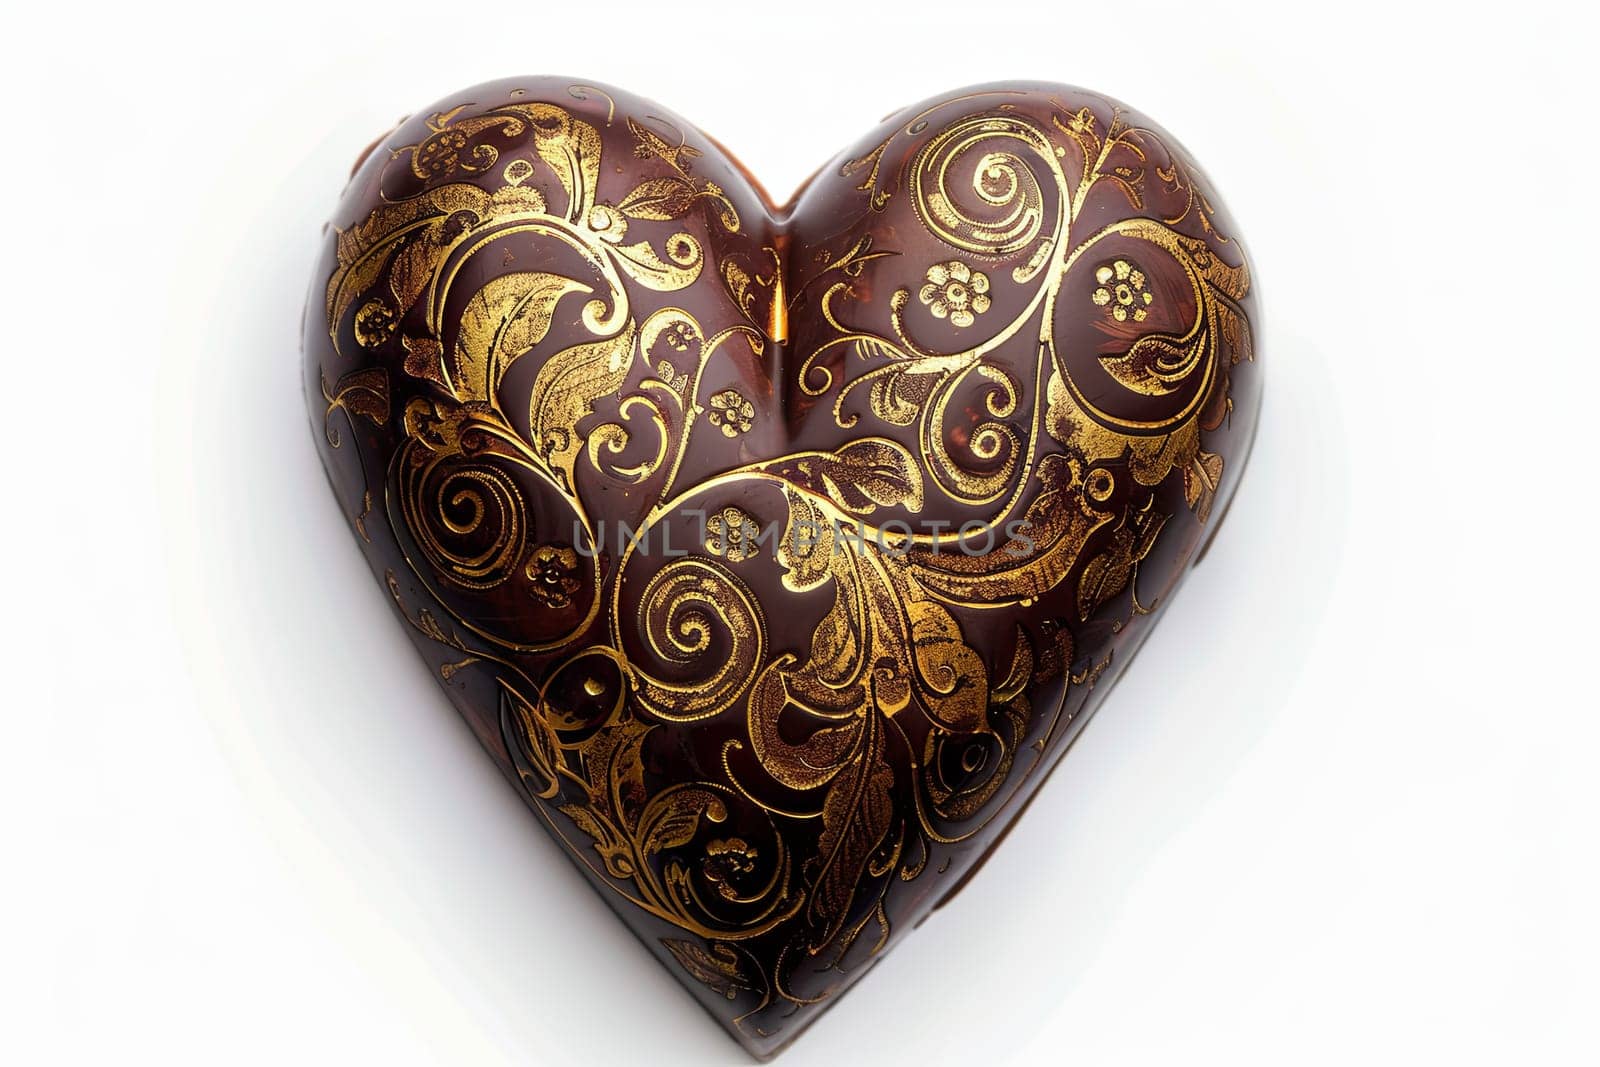 Detailed heart-shaped chocolate box with intricate golden design on a white background.